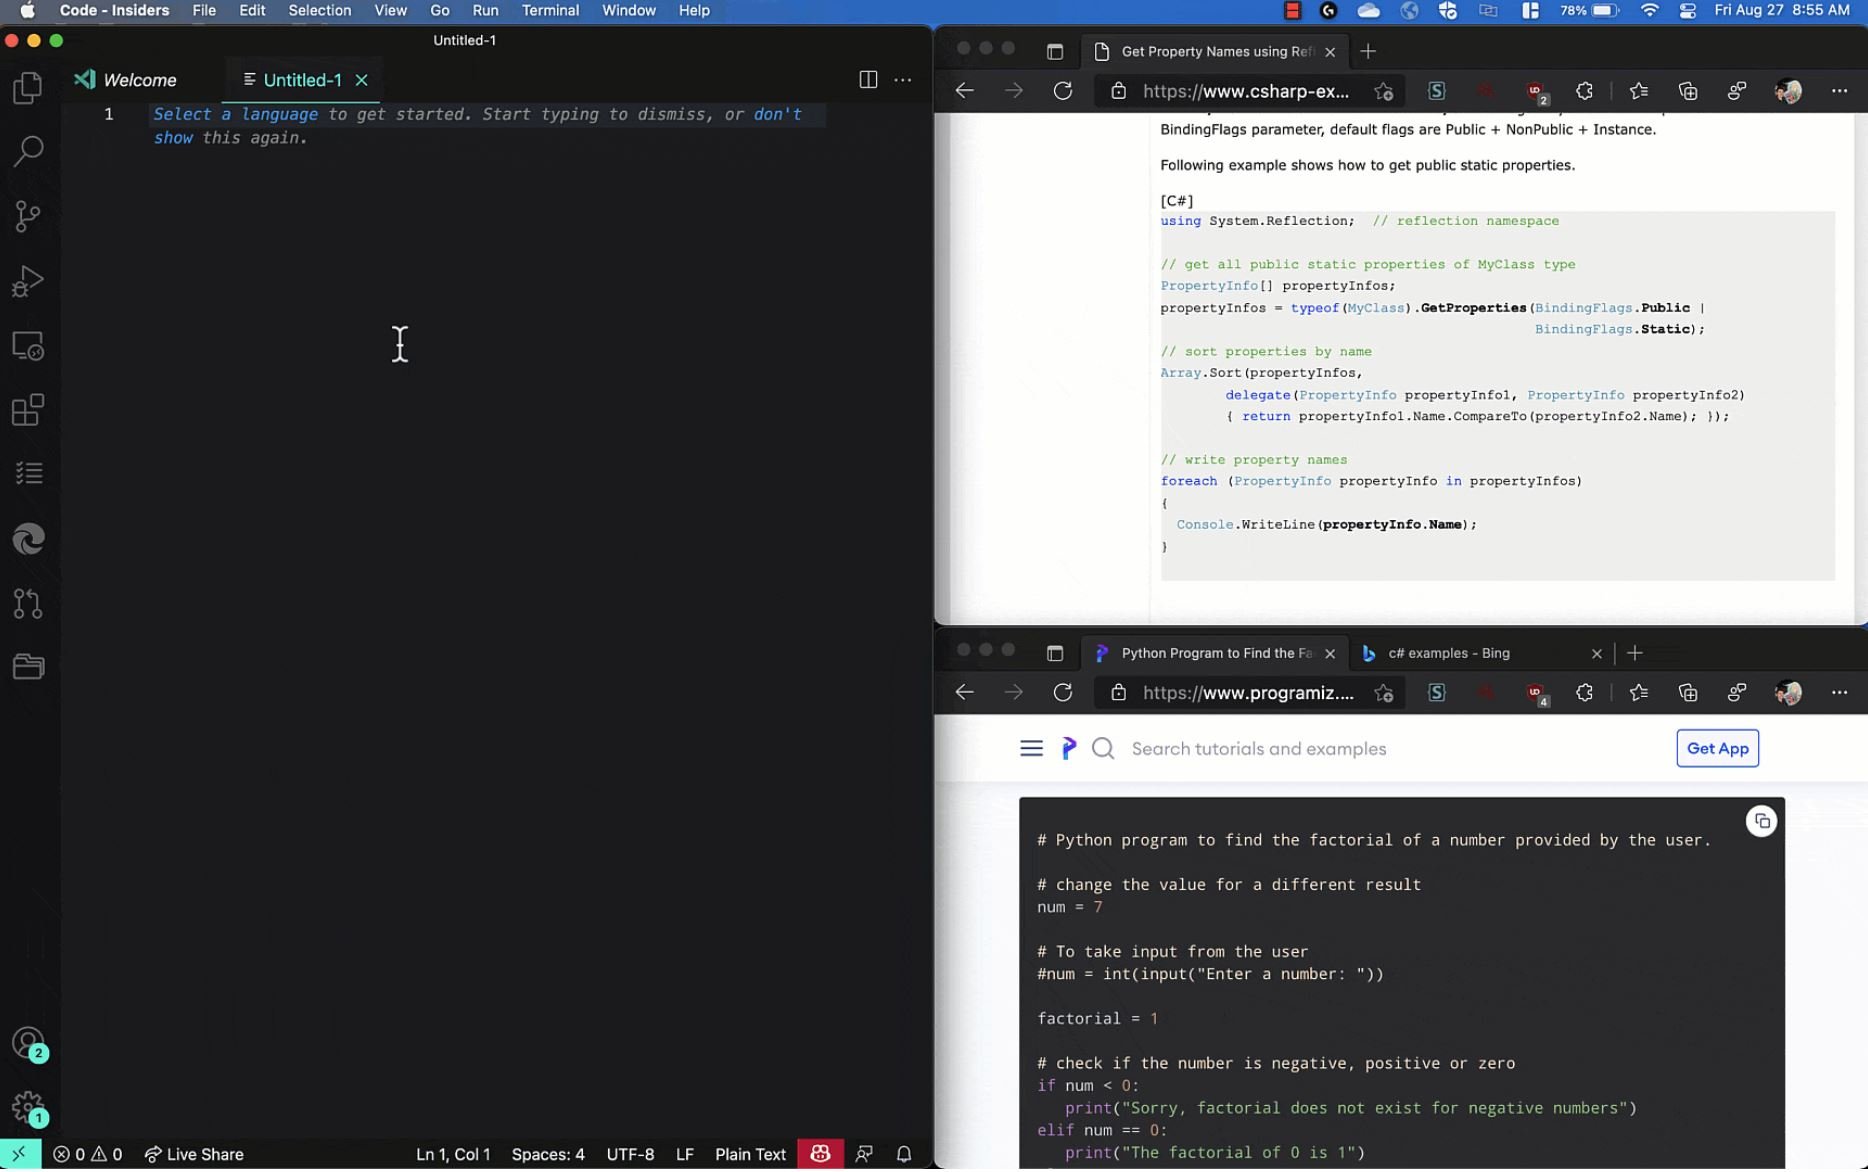 Microsoft releases Visual Studio Code version 1.60 with automatic language detection and more